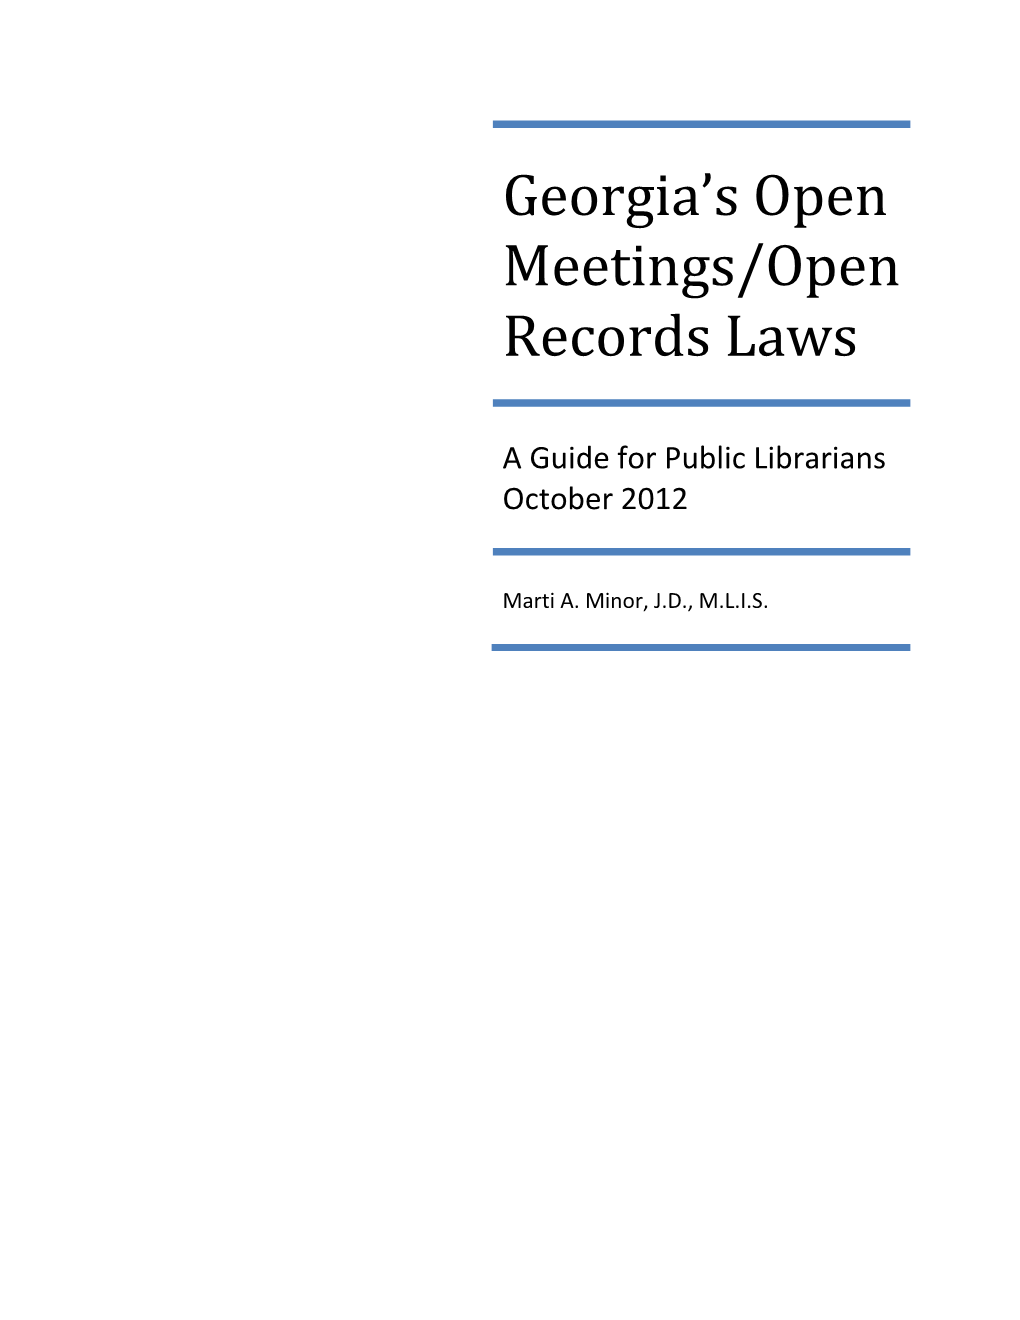 Georgia's Open Meetings/Open Records Laws